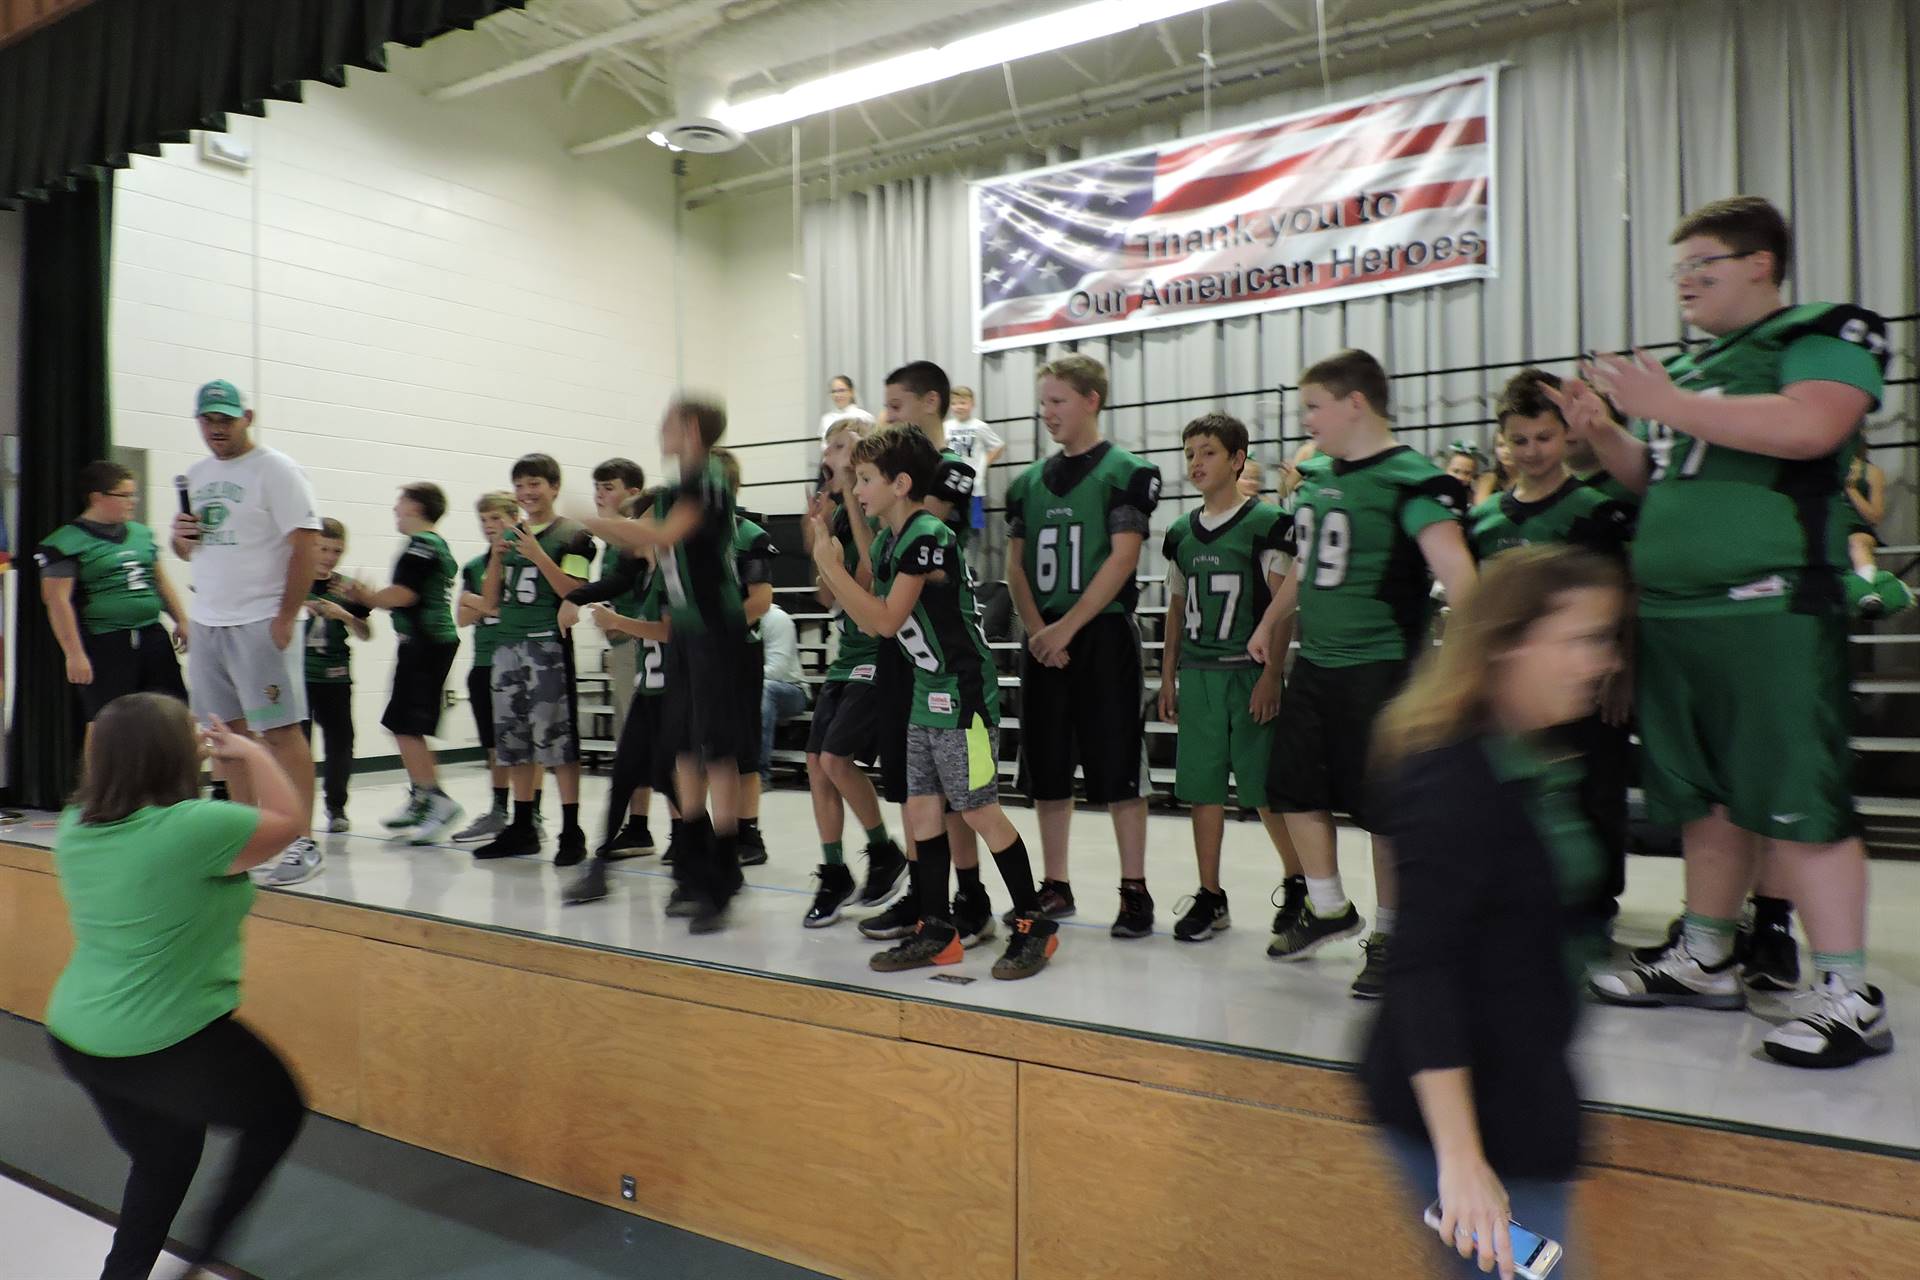 Youth League Football A Team  "Good Luck at the SUPERBOWL"  Rock HIll on Nov. 4!